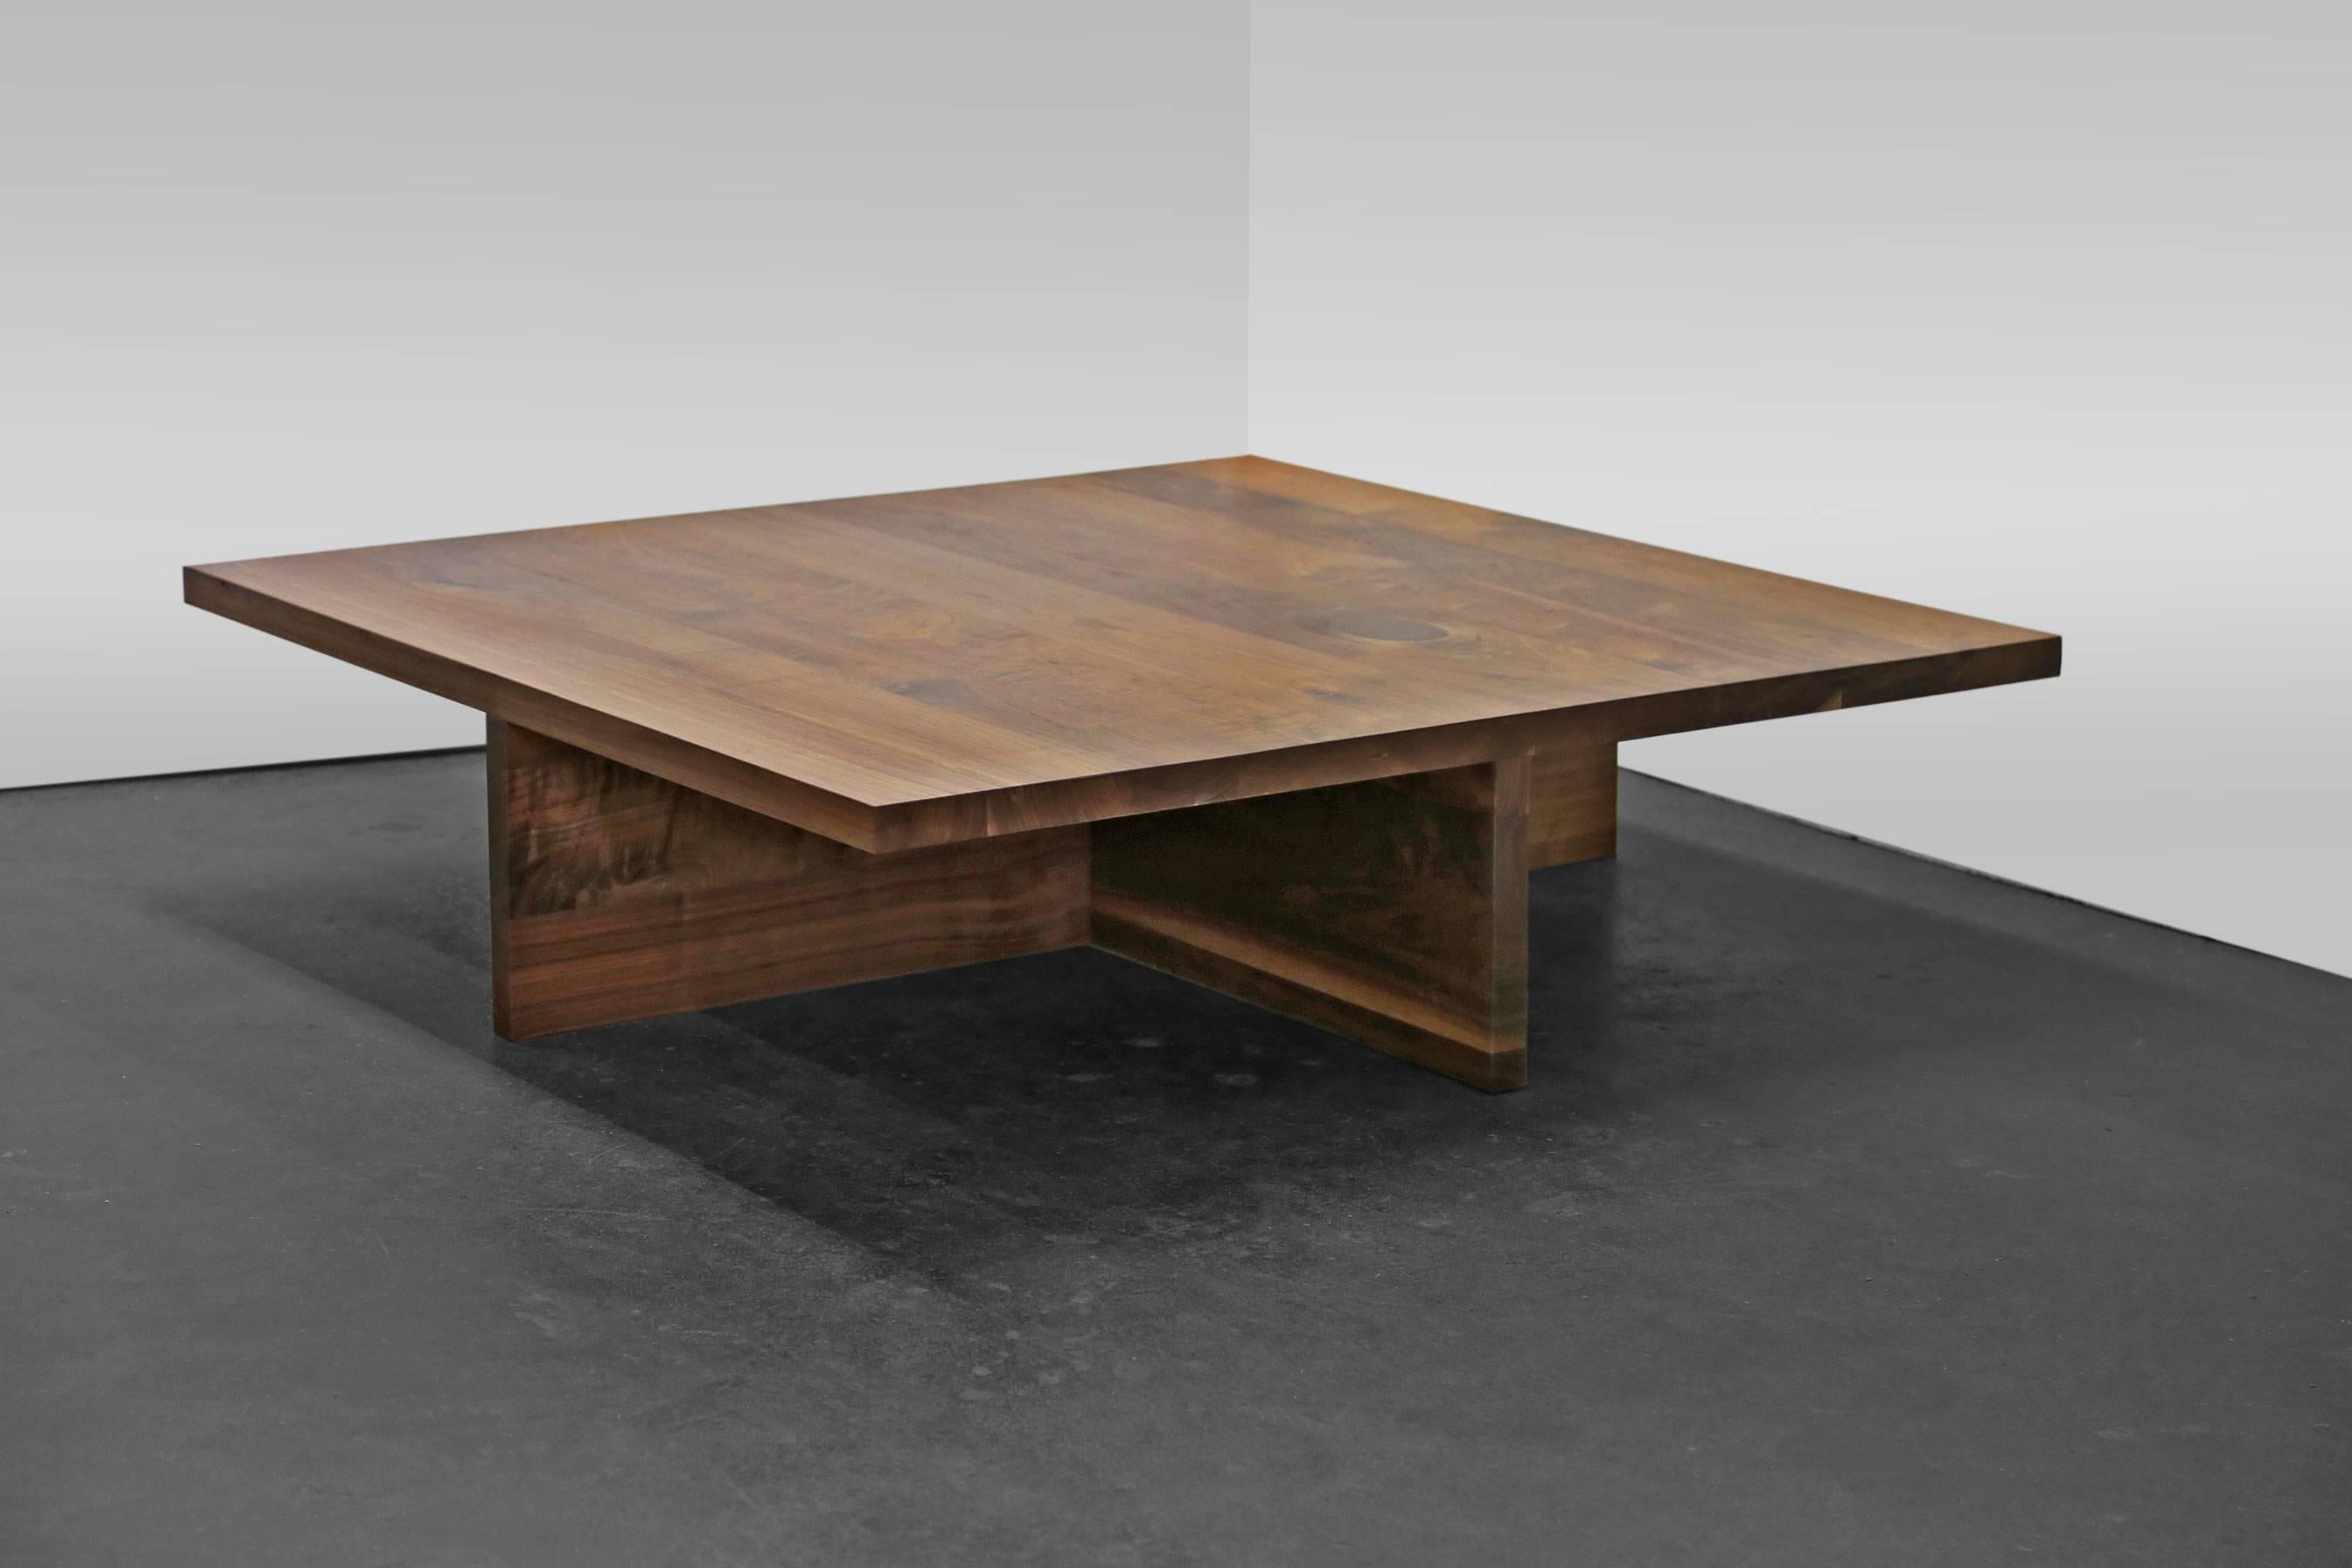 A simple hardwood coffee table that is minimal in design and allows the black walnut grain to speak for itself. Each piece is custom-made to order in our Brooklyn workshop. Custom dimensions and finishes are available.

Handcrafted in Brooklyn, New